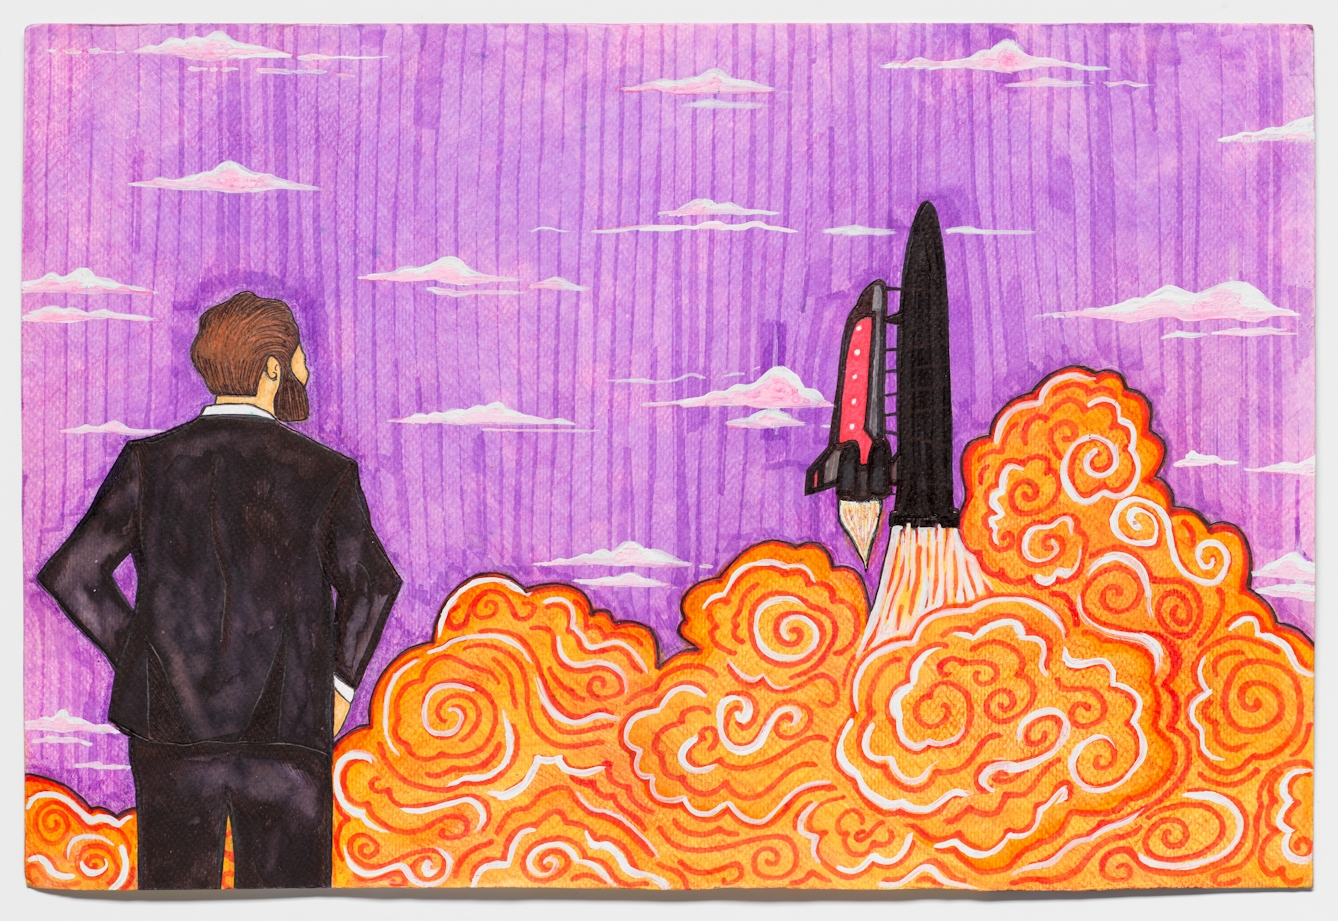 Colourful artwork made with paint and ink on textured watercolour paper. The artwork shows a white man with a beard in a black suit standing with his hands on his hips look away from us to a scene where a large black and red space shuttle has just taken off. Large plumes of swirling orange smoke billow out from the space craft's rockets, filling the foreground of the scene. The sky behind in a light purple in colour with small elongated clouds.